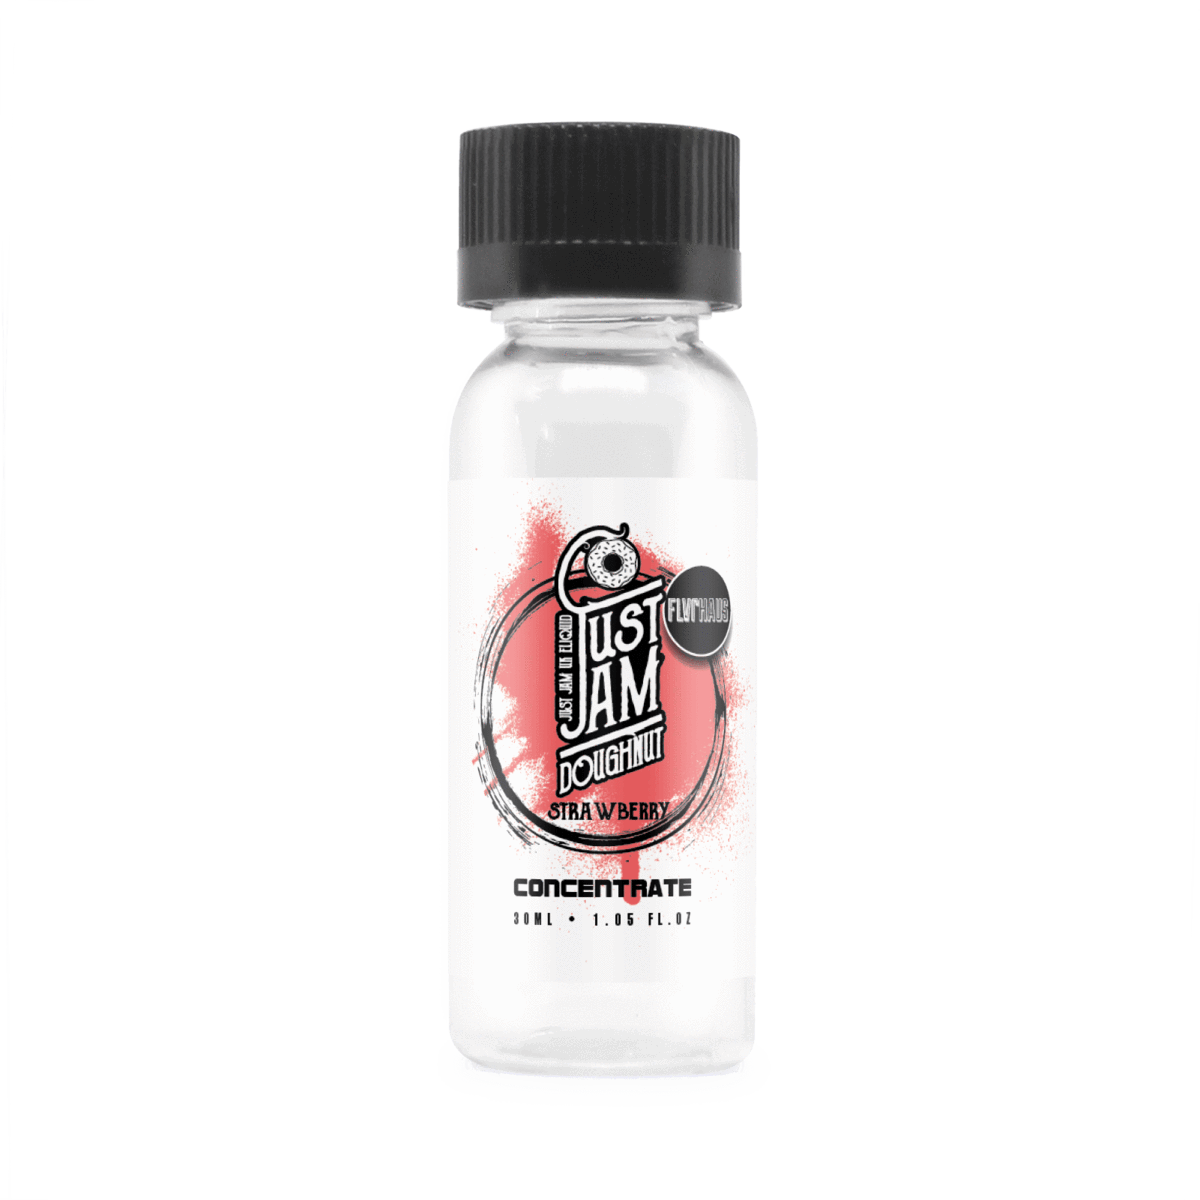 Just Jam Strawberry Doughnut Flavour Concentrate